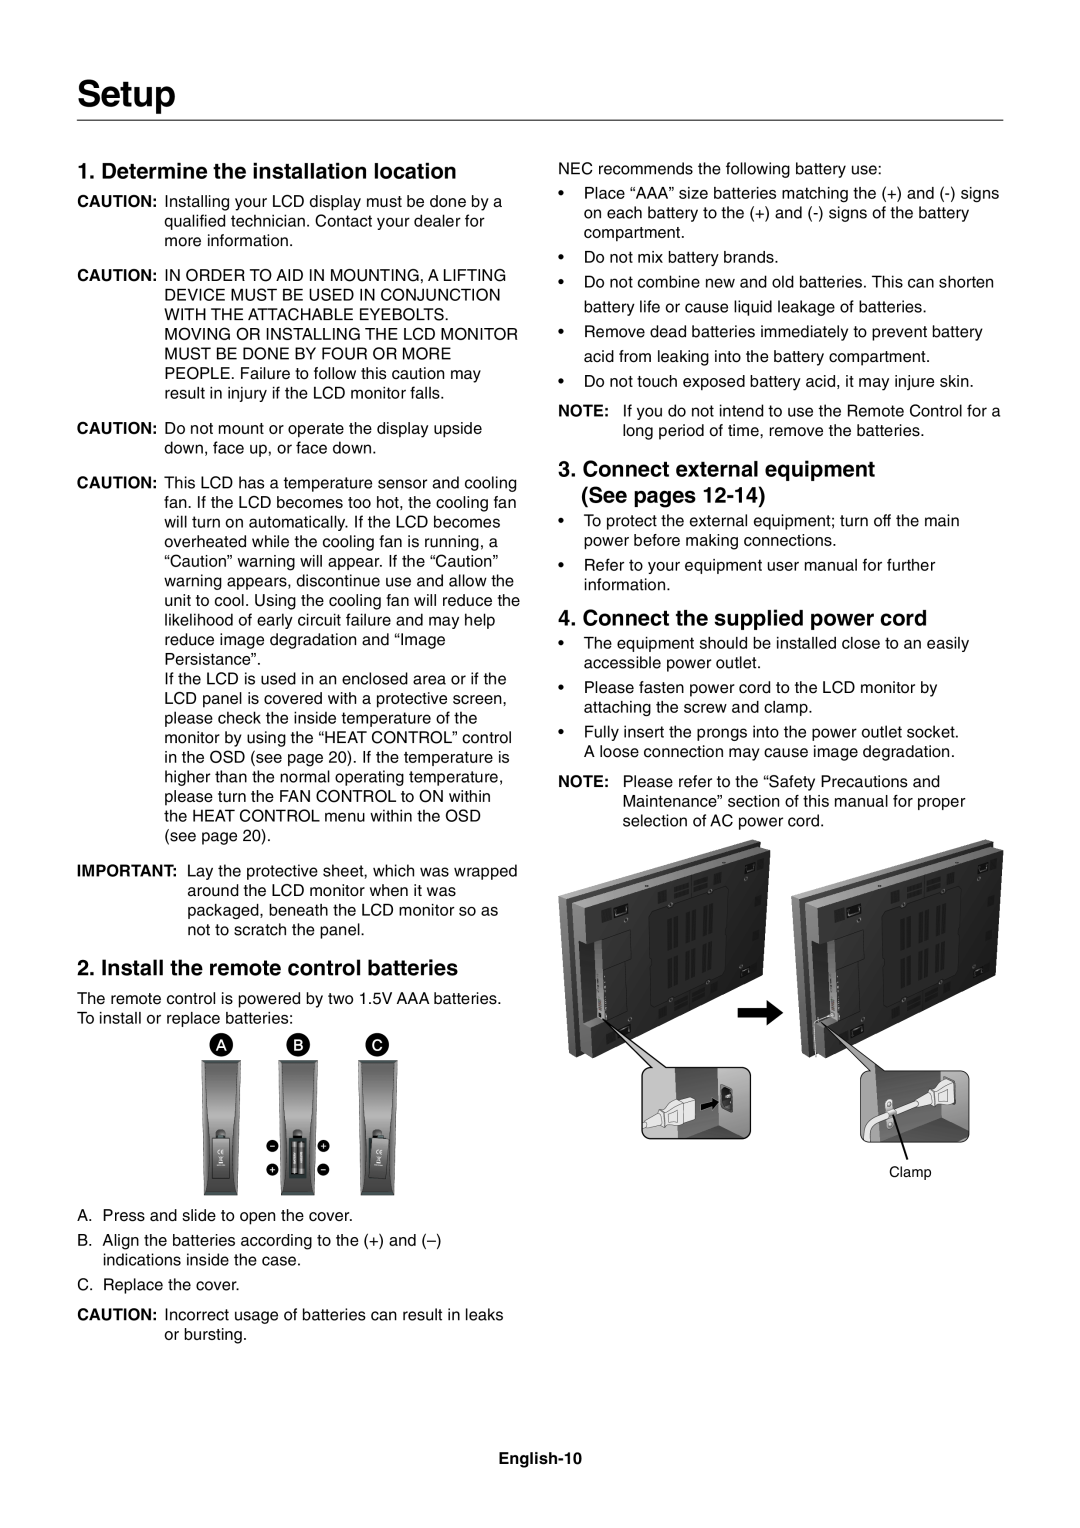 NEC LCD8205-P user manual Setup, Determine the installation location, Install the remote control batteries 